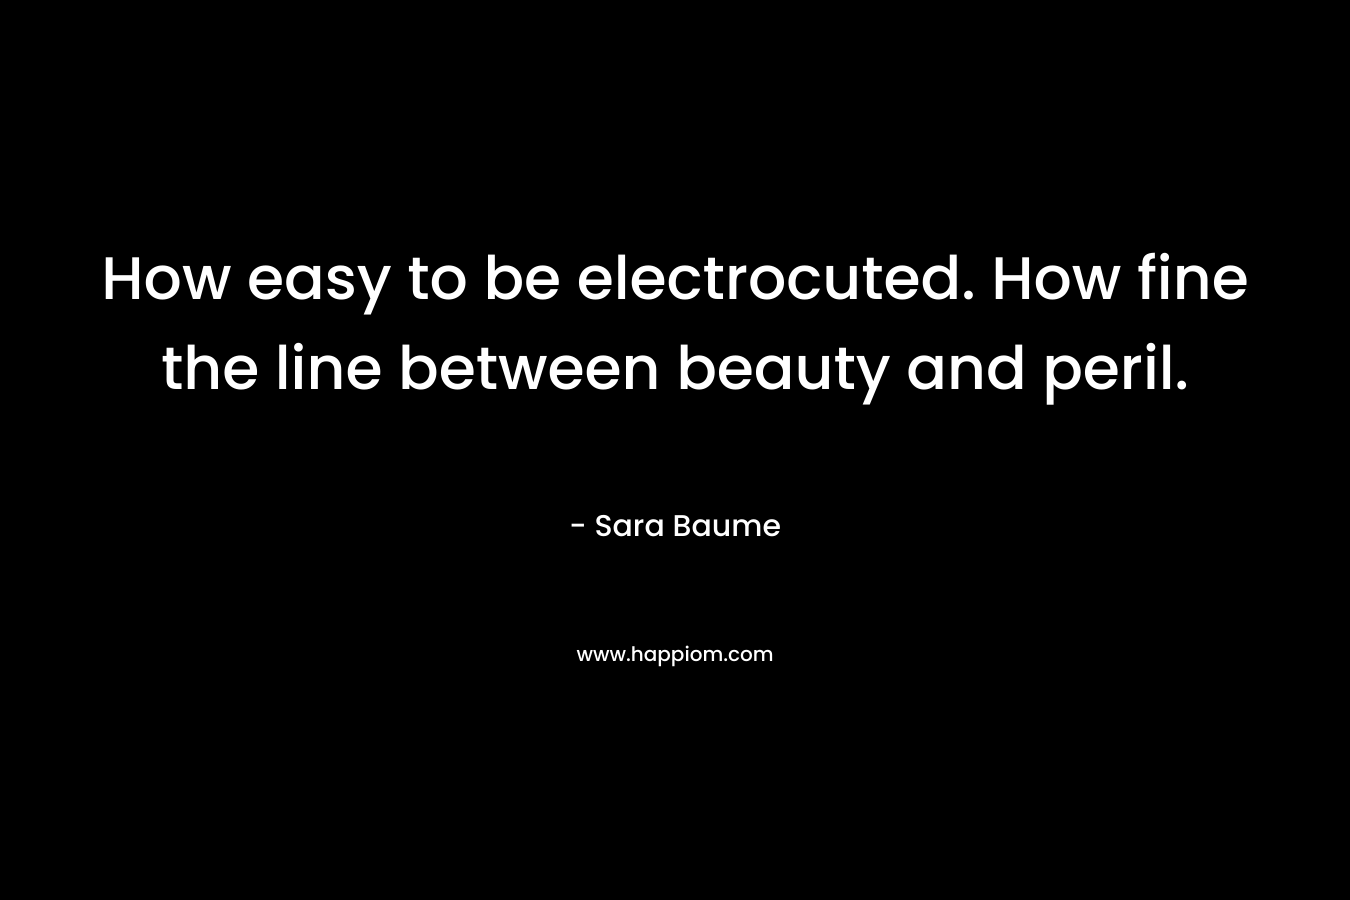 How easy to be electrocuted. How fine the line between beauty and peril.